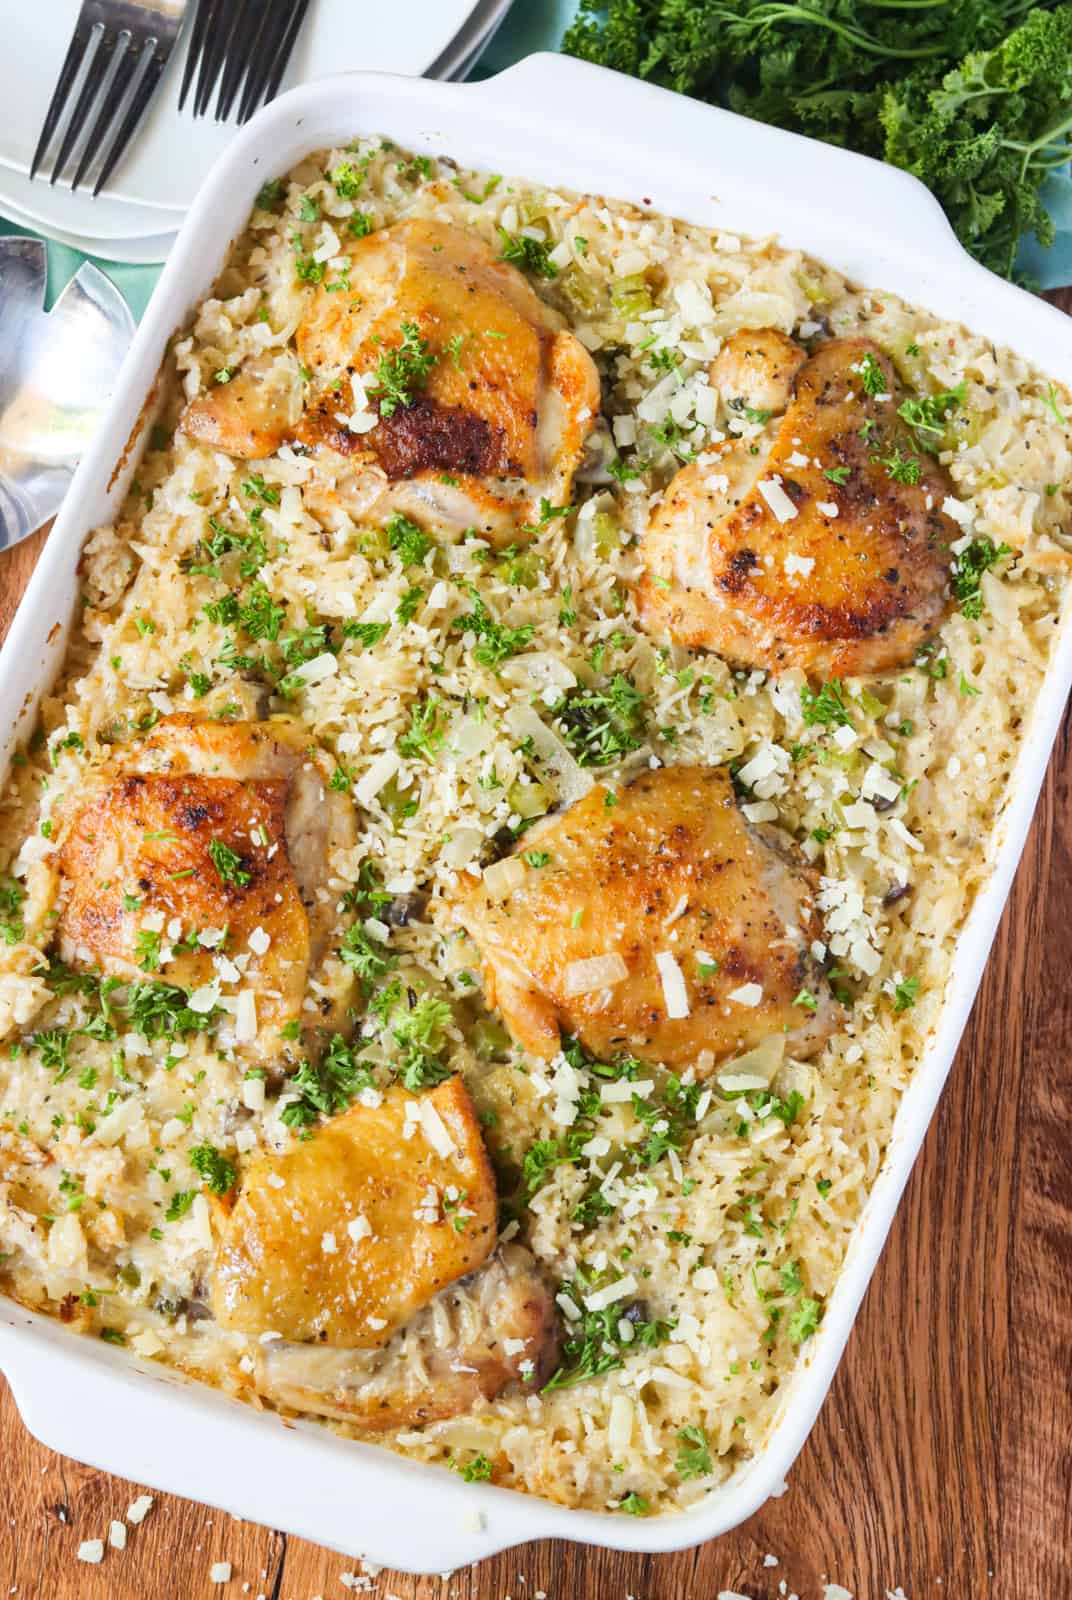 Flavorful freshly baked chicken and rice casserole